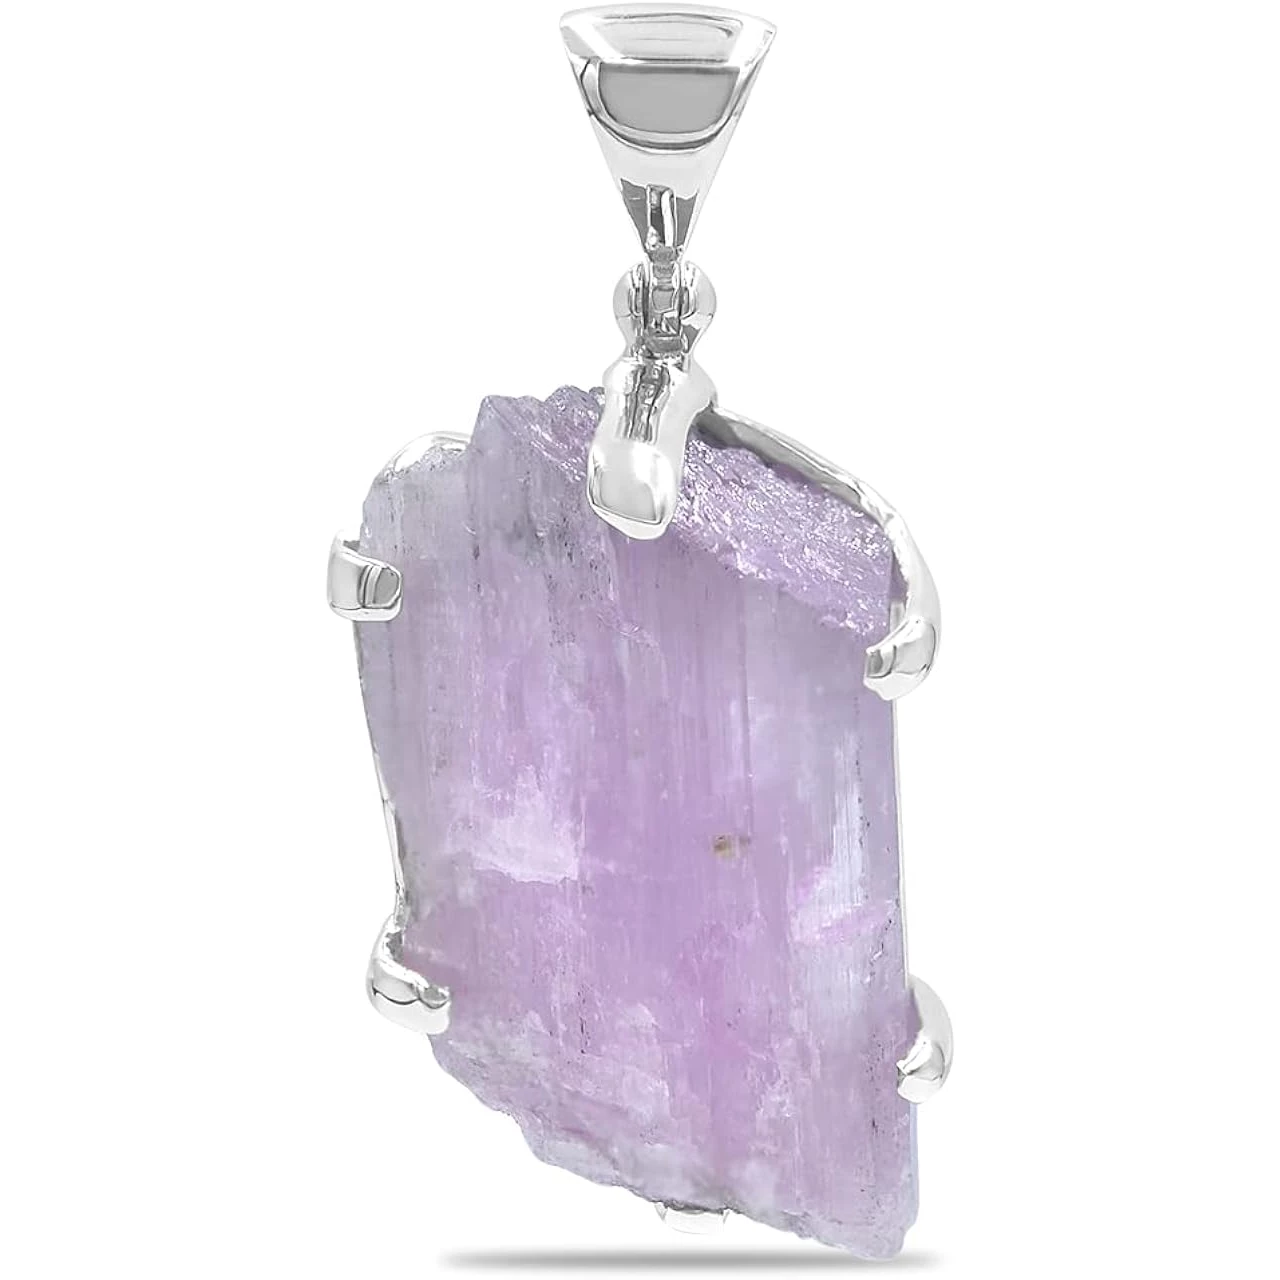 Starborn Rough Gemstone Sterling Silver Pendant - X Large